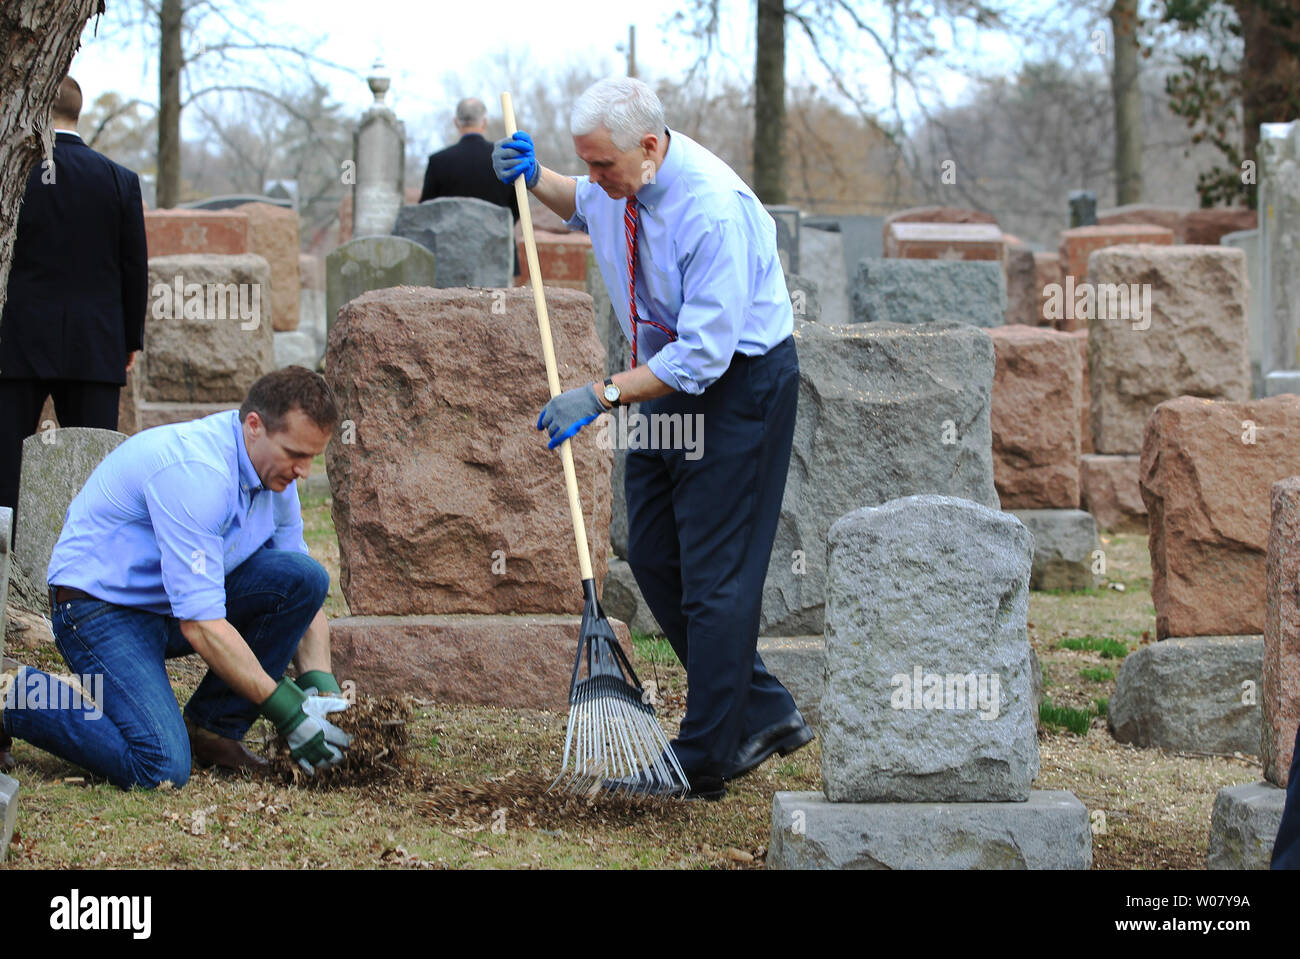 Vice President Mike Pence rakes leaves while Missouri Governor Eric Greitens picks them up at Chesed Shel Emeth Cemetery in University City on February 22, 2017. Vandals toppled nearly 200 headstones on February 20, 2017 in the Jewish cemetery. Pence who was in town for another event had asked to go to the cemetery for the large community cleanup that attracted over four thousand people.  Photo by Bill Greenblatt/UPI Stock Photo